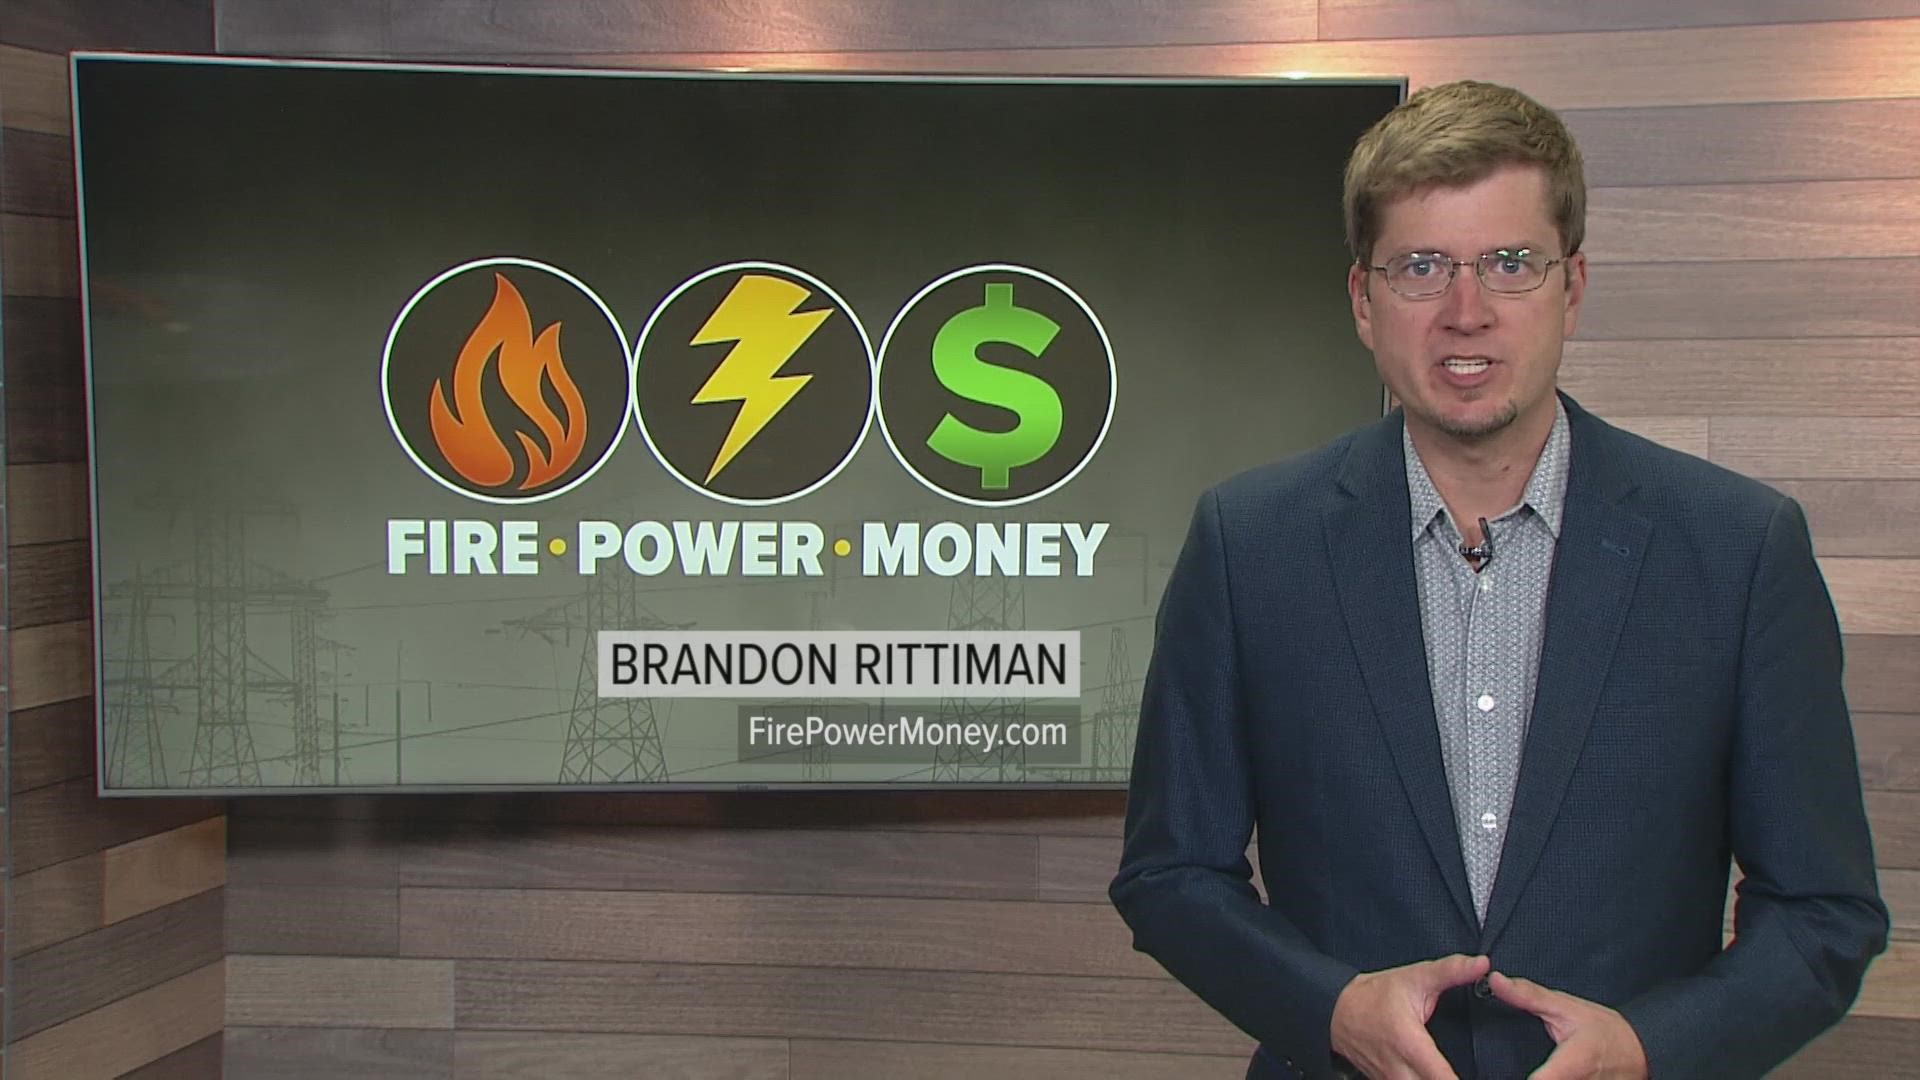 Brandon Rittiman explains the punishment PG&E is facing if they are found guilty by Shasta County prosecutors.